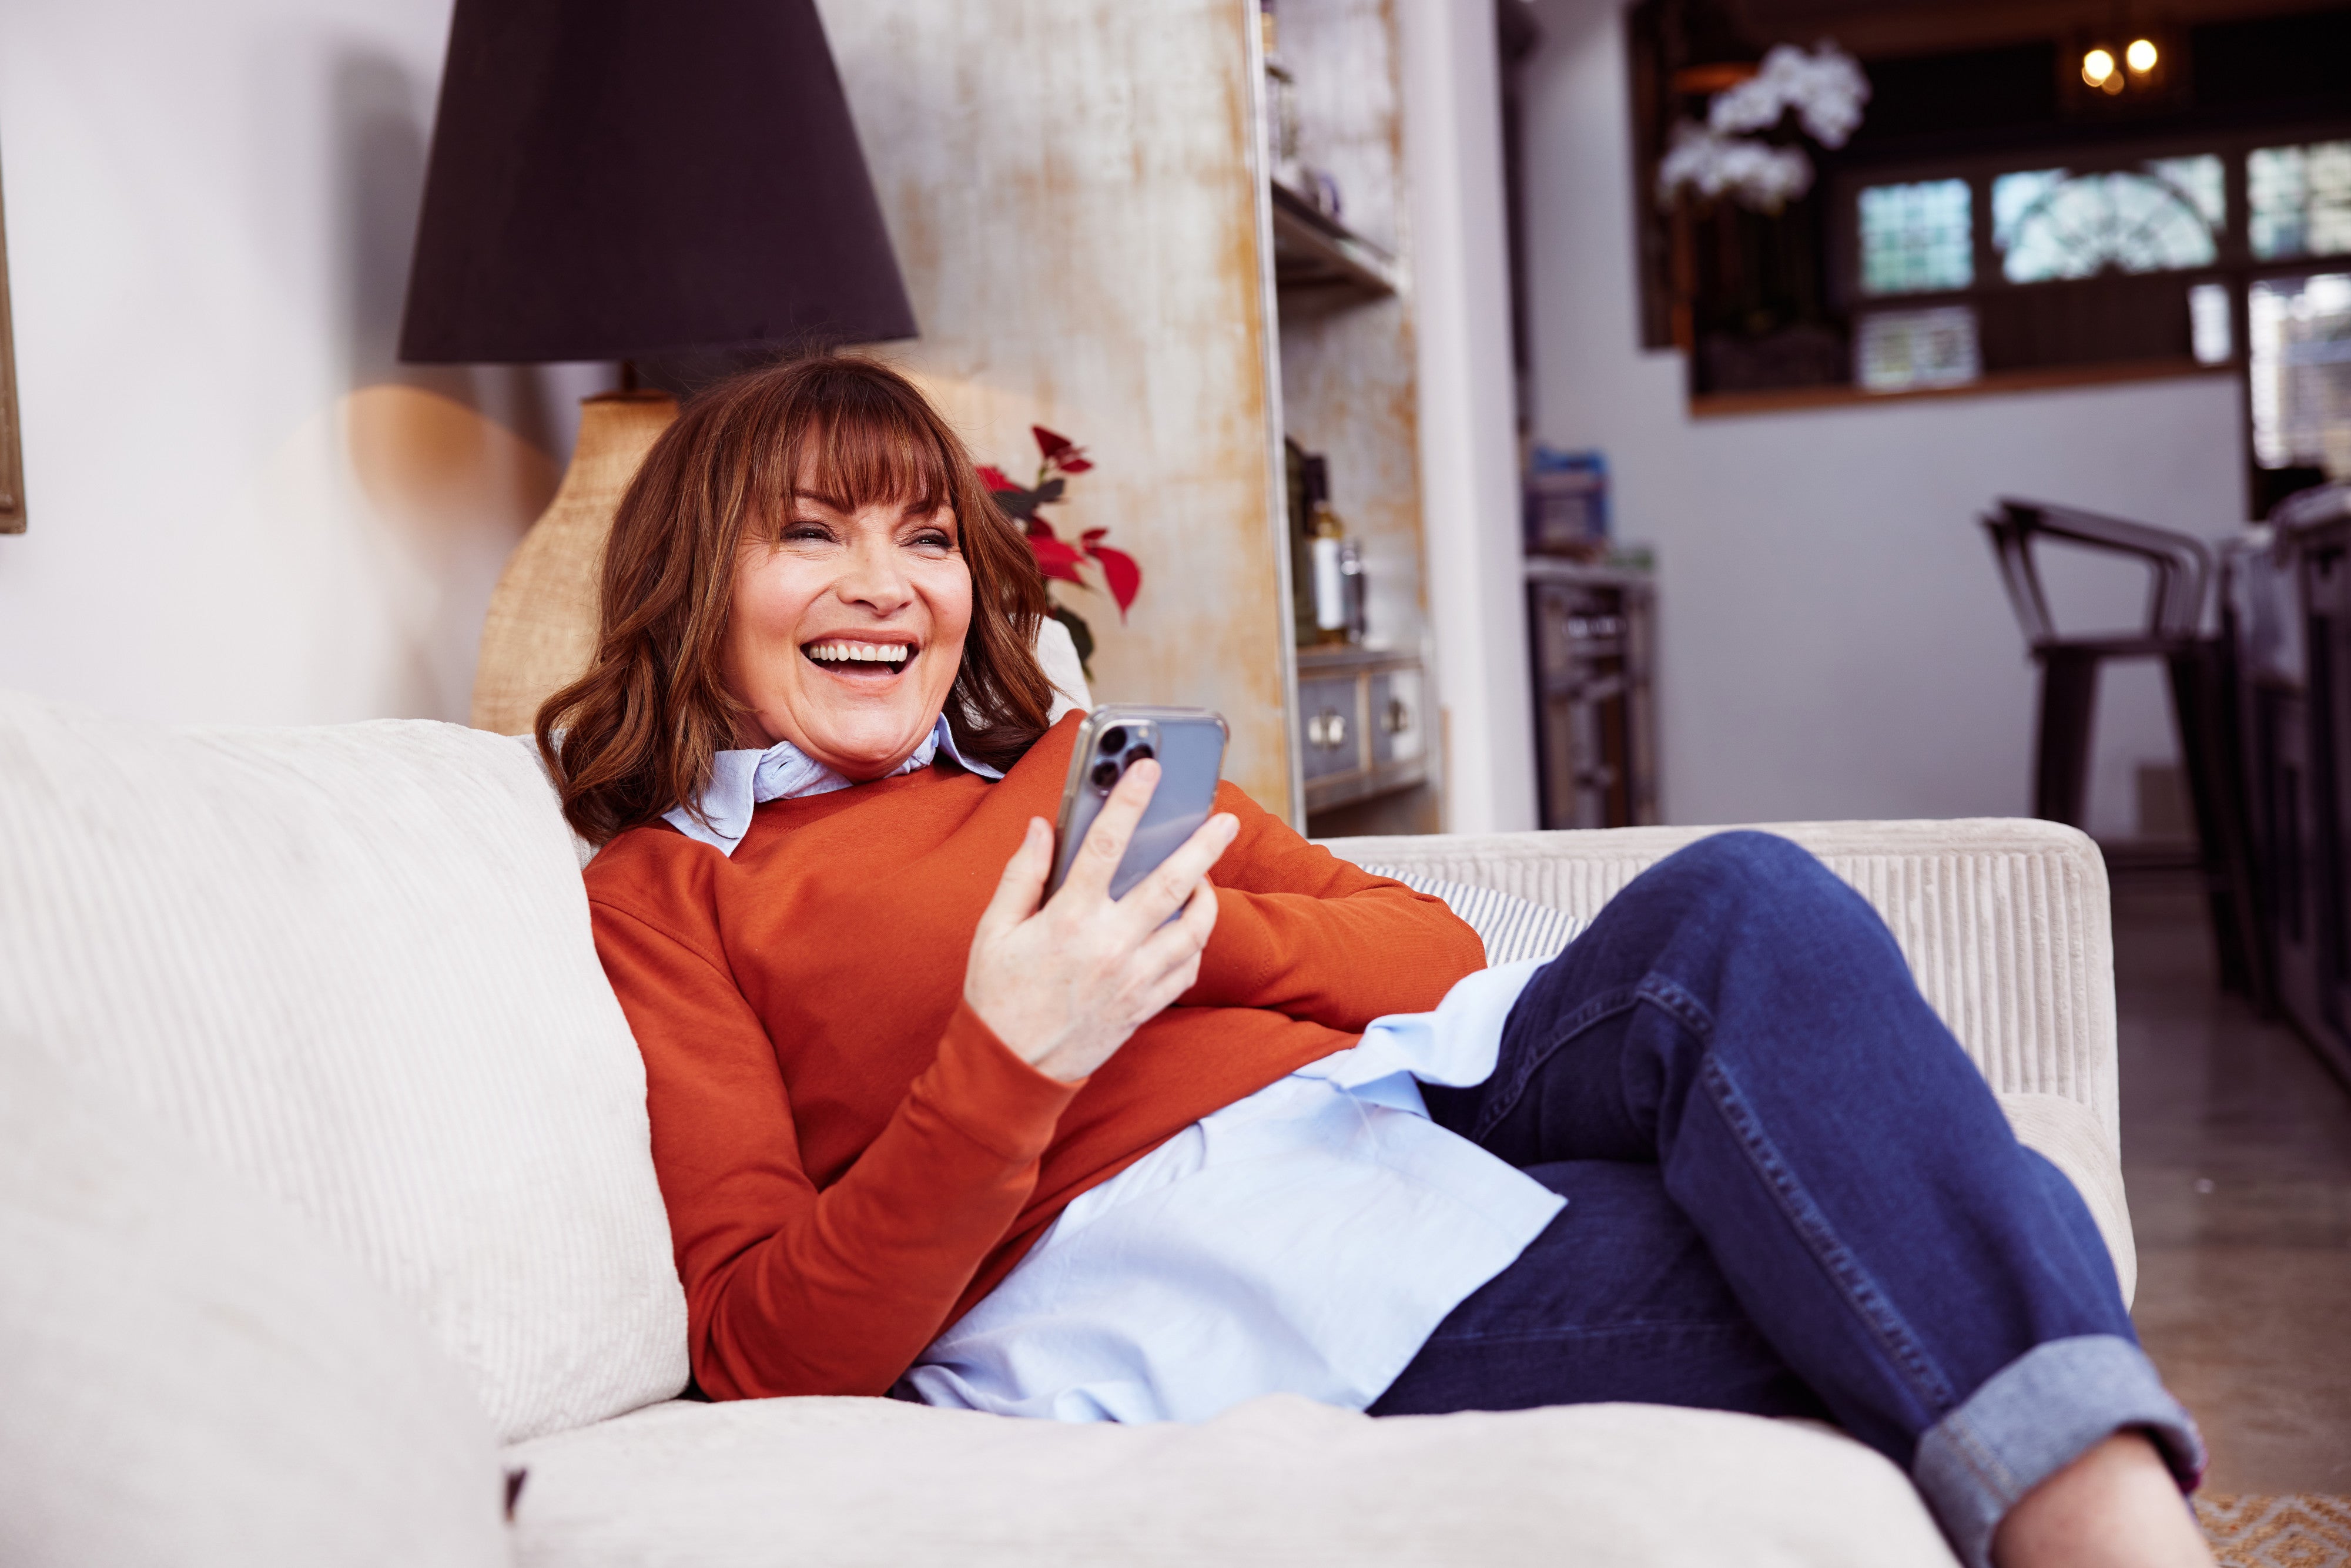 Image of Lorraine Kelly smiling on her sofa holding a phone